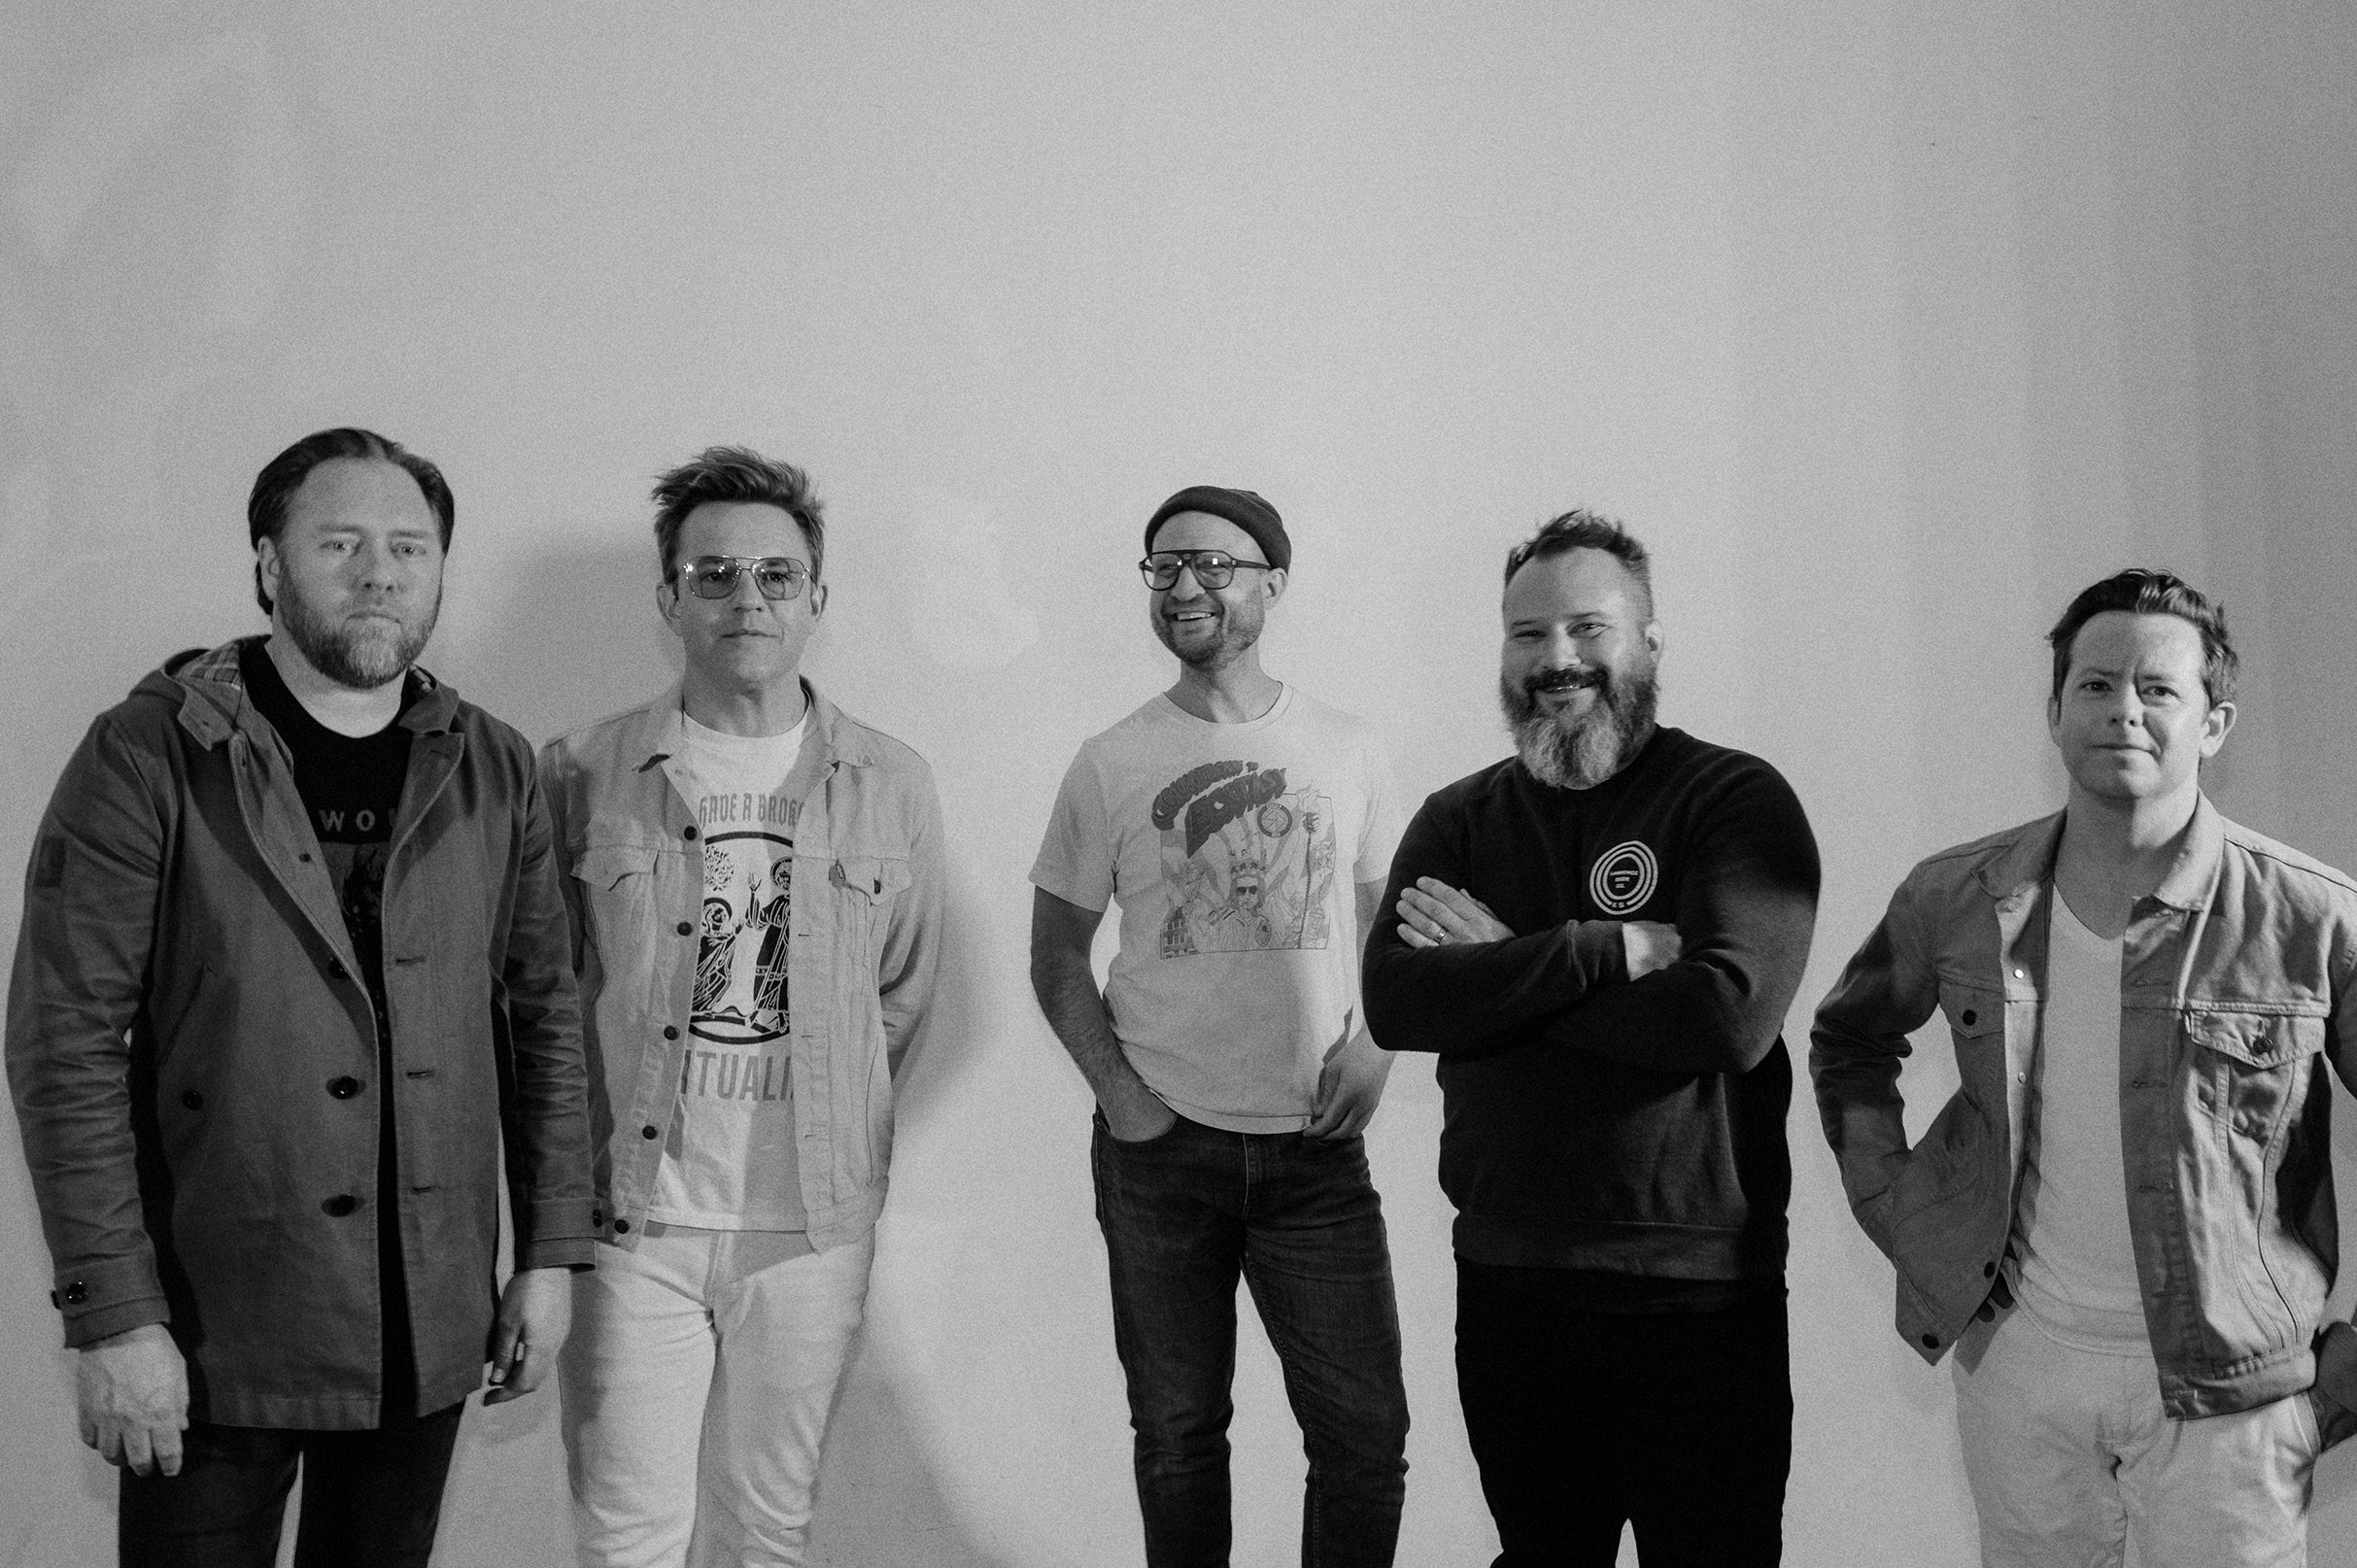 The Get Up Kids - 25 Years Of Something To Write Home About in Asbury Park promo photo for Venue Online presale offer code